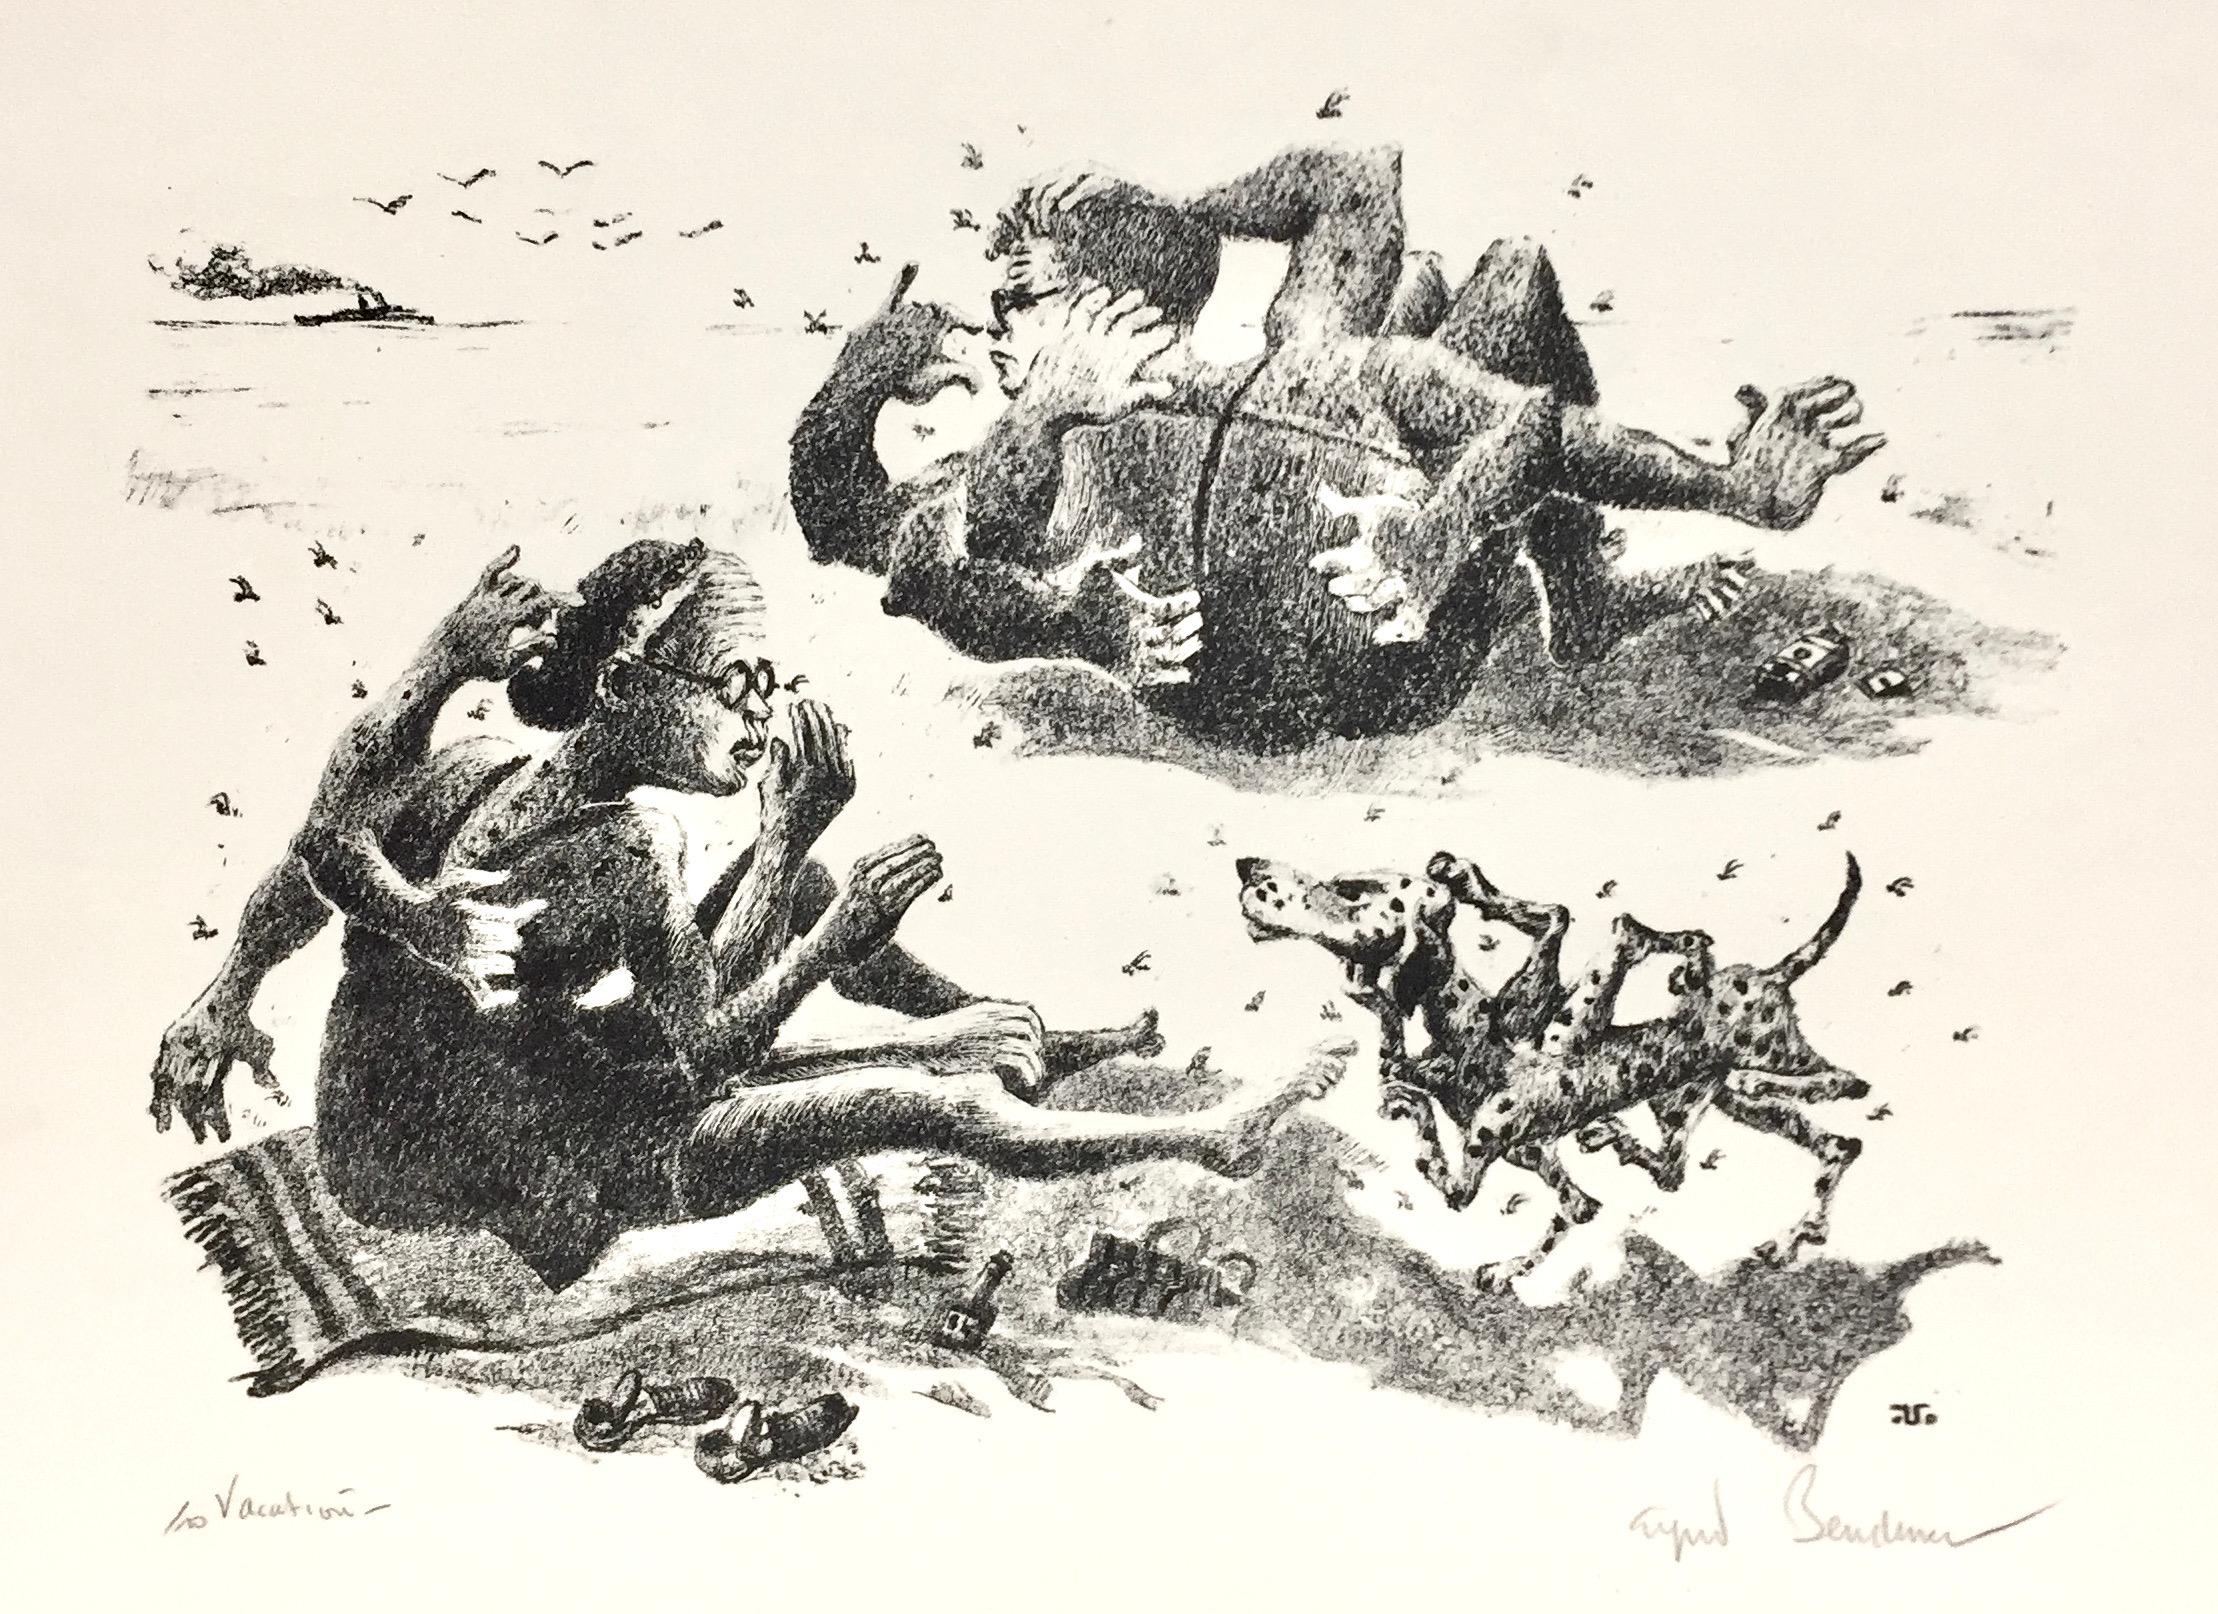 No matter the seriousness (or lack thereof) of the subject, everything is always beautifully drawn on the lithographic stone by Bendiner.

In this 'Day at the Beach' scene Bendiner had drawn himself, his wife, and their dalmation, all sitting on the